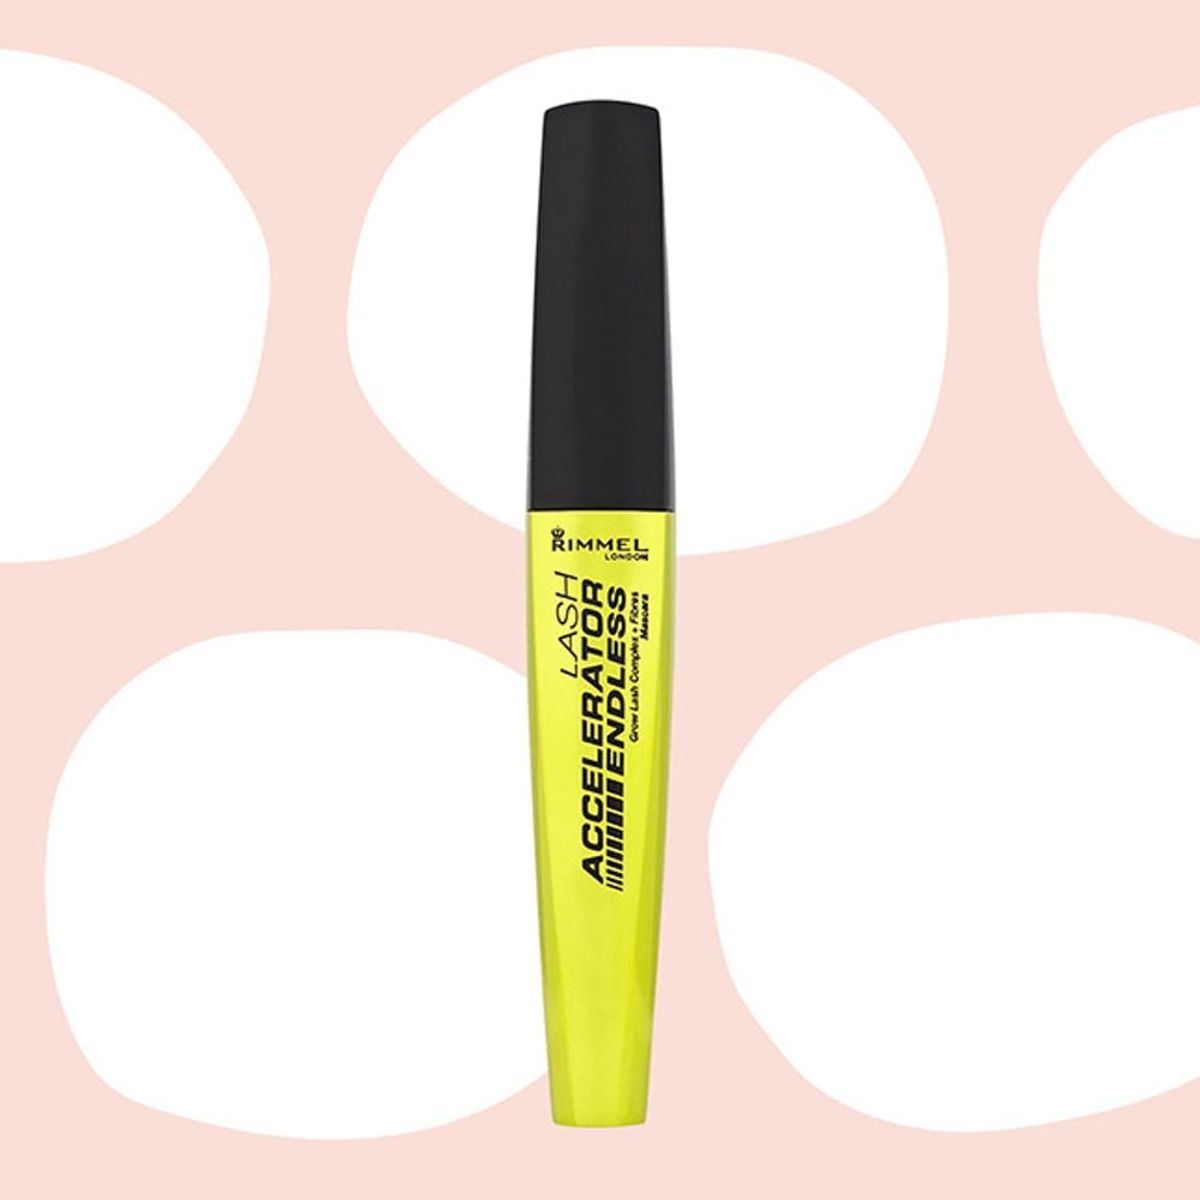 How a $9 Mascara Gave Me the Long, Thick Lashes of My Dreams